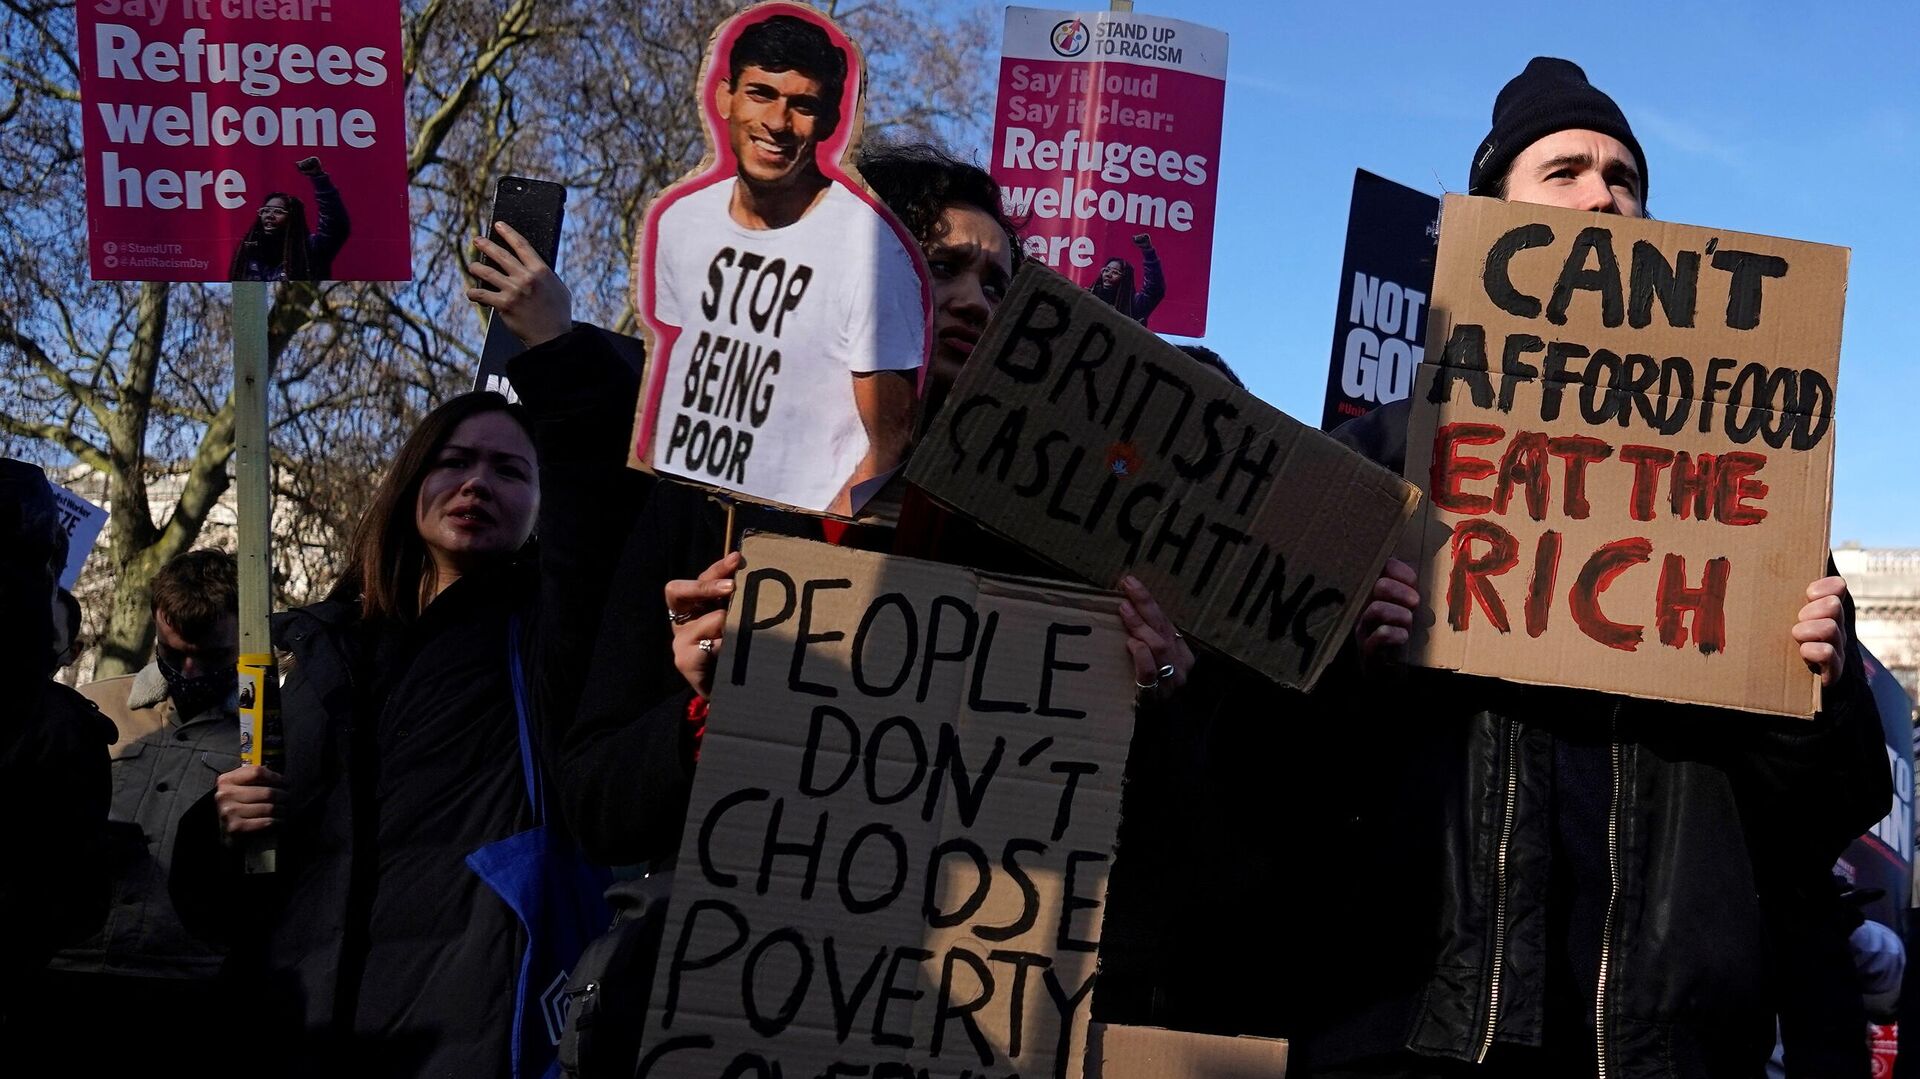 Demonstrators stand with placards in Parliament Square at a protest organised by The People's Assembly to demand action to tackle the cost of living crisis in London on February 12, 2022. - Sputnik International, 1920, 12.02.2022